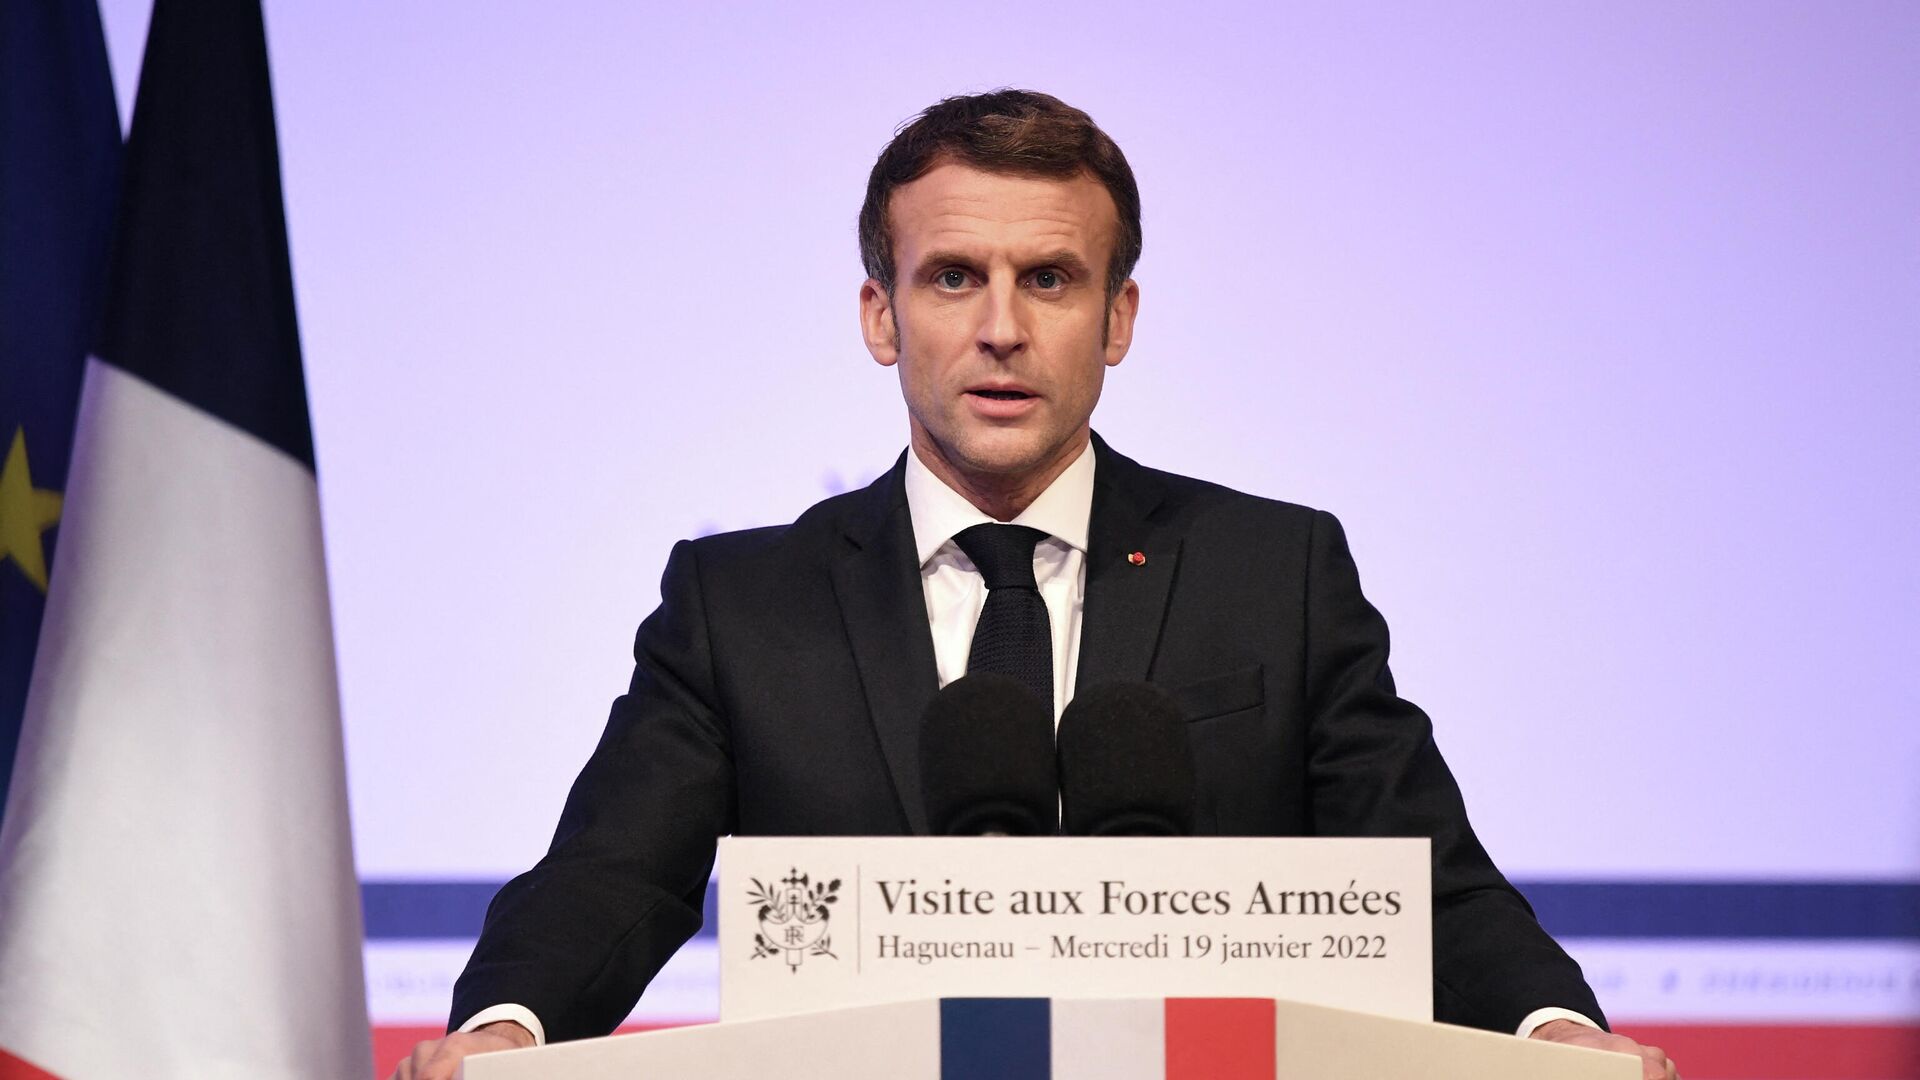 French President Emmanuel Macron delivers his New Year wishes speech to the armed forces at Oberhoffen camp in Haguenau, France, January 19, 2022. - Sputnik International, 1920, 19.01.2022